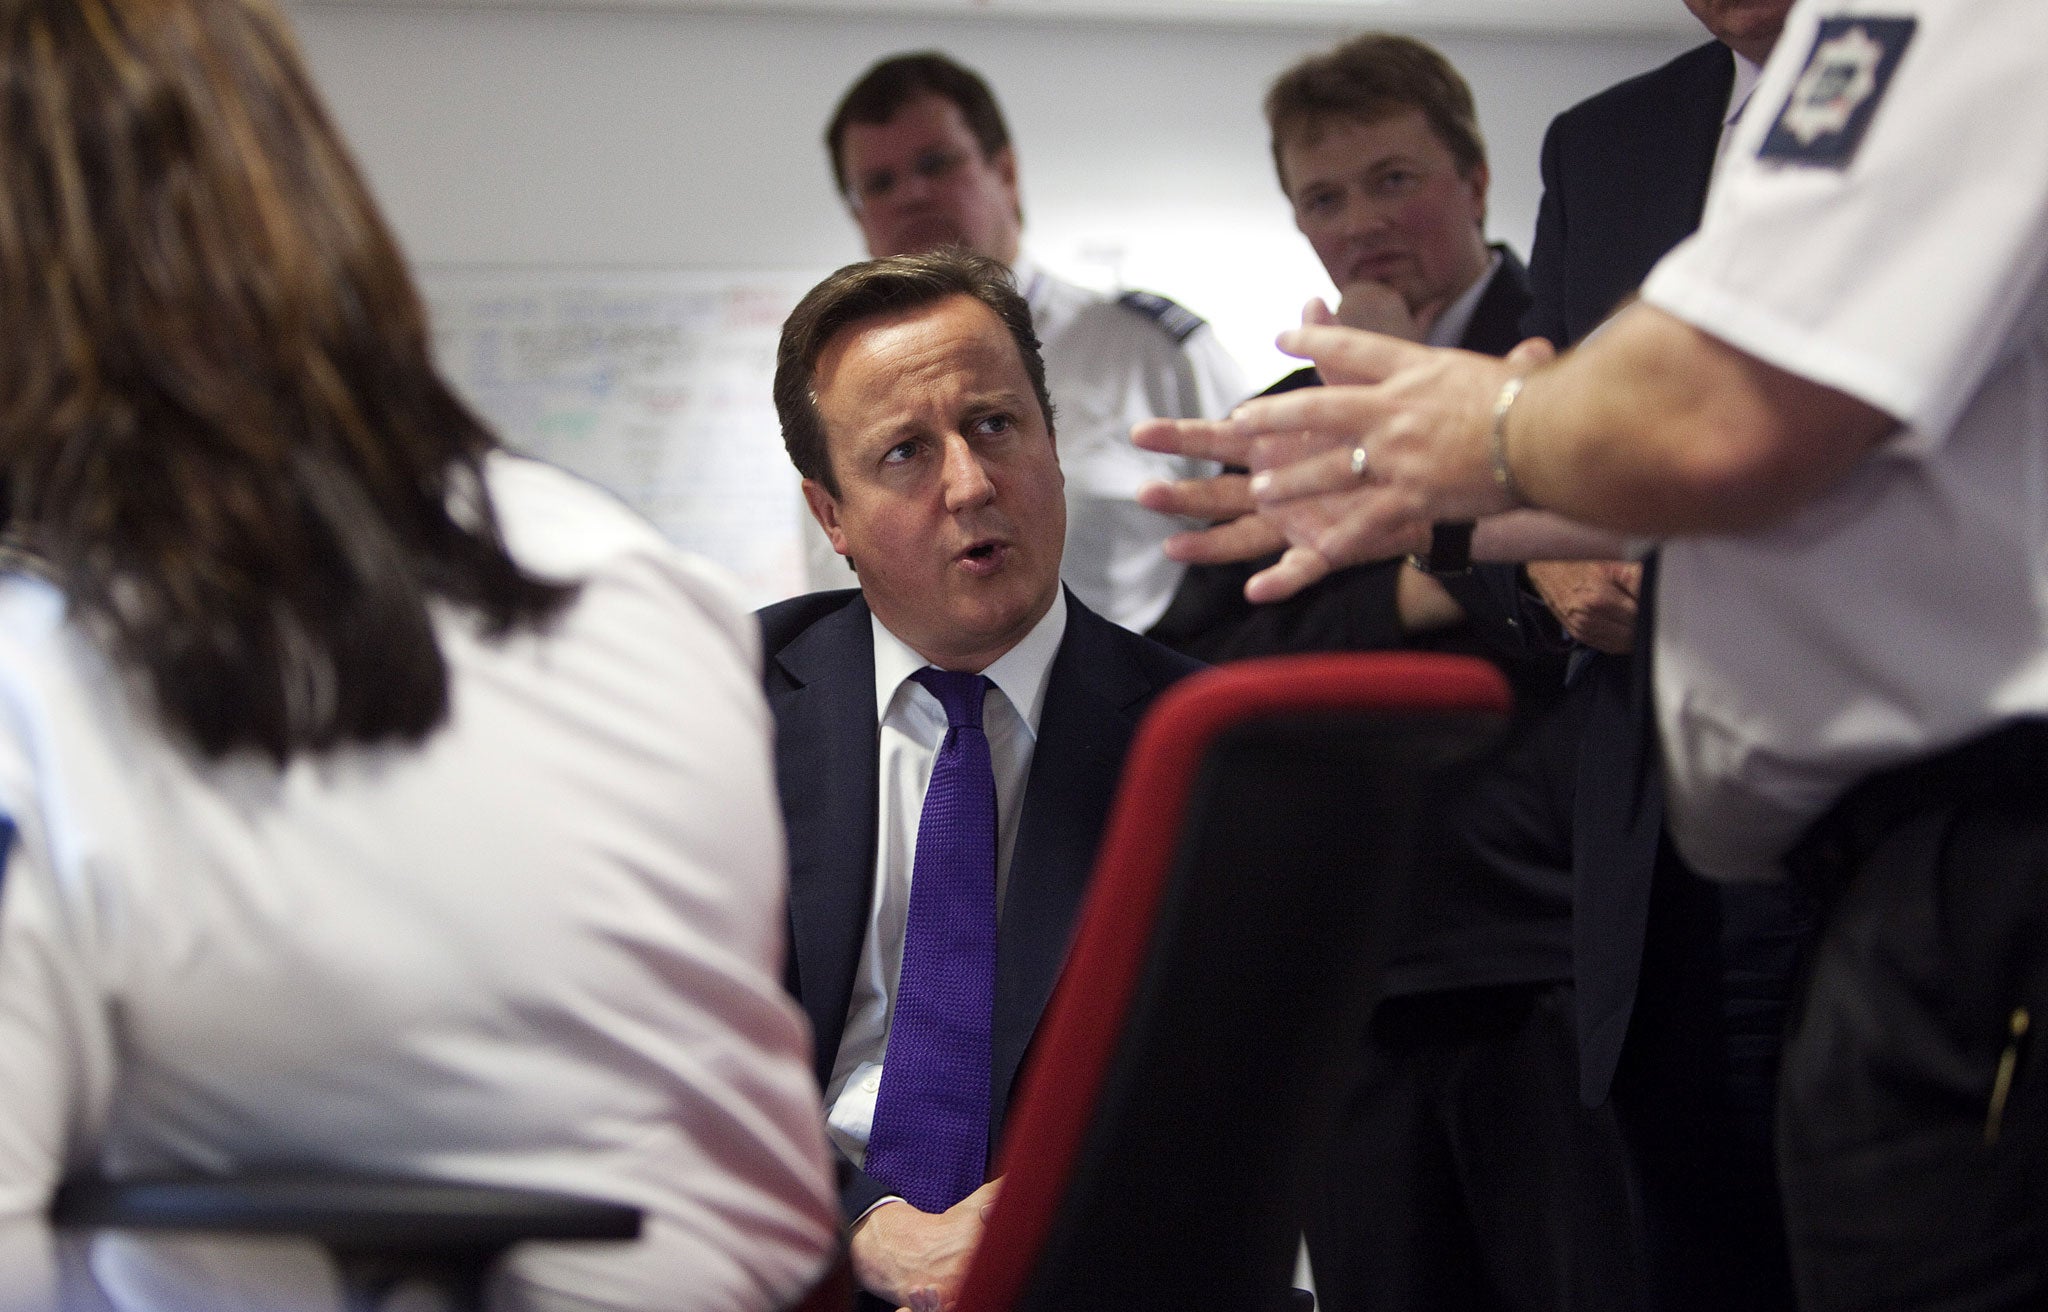 Prime minister David Cameron talks with border agency officials in 2011